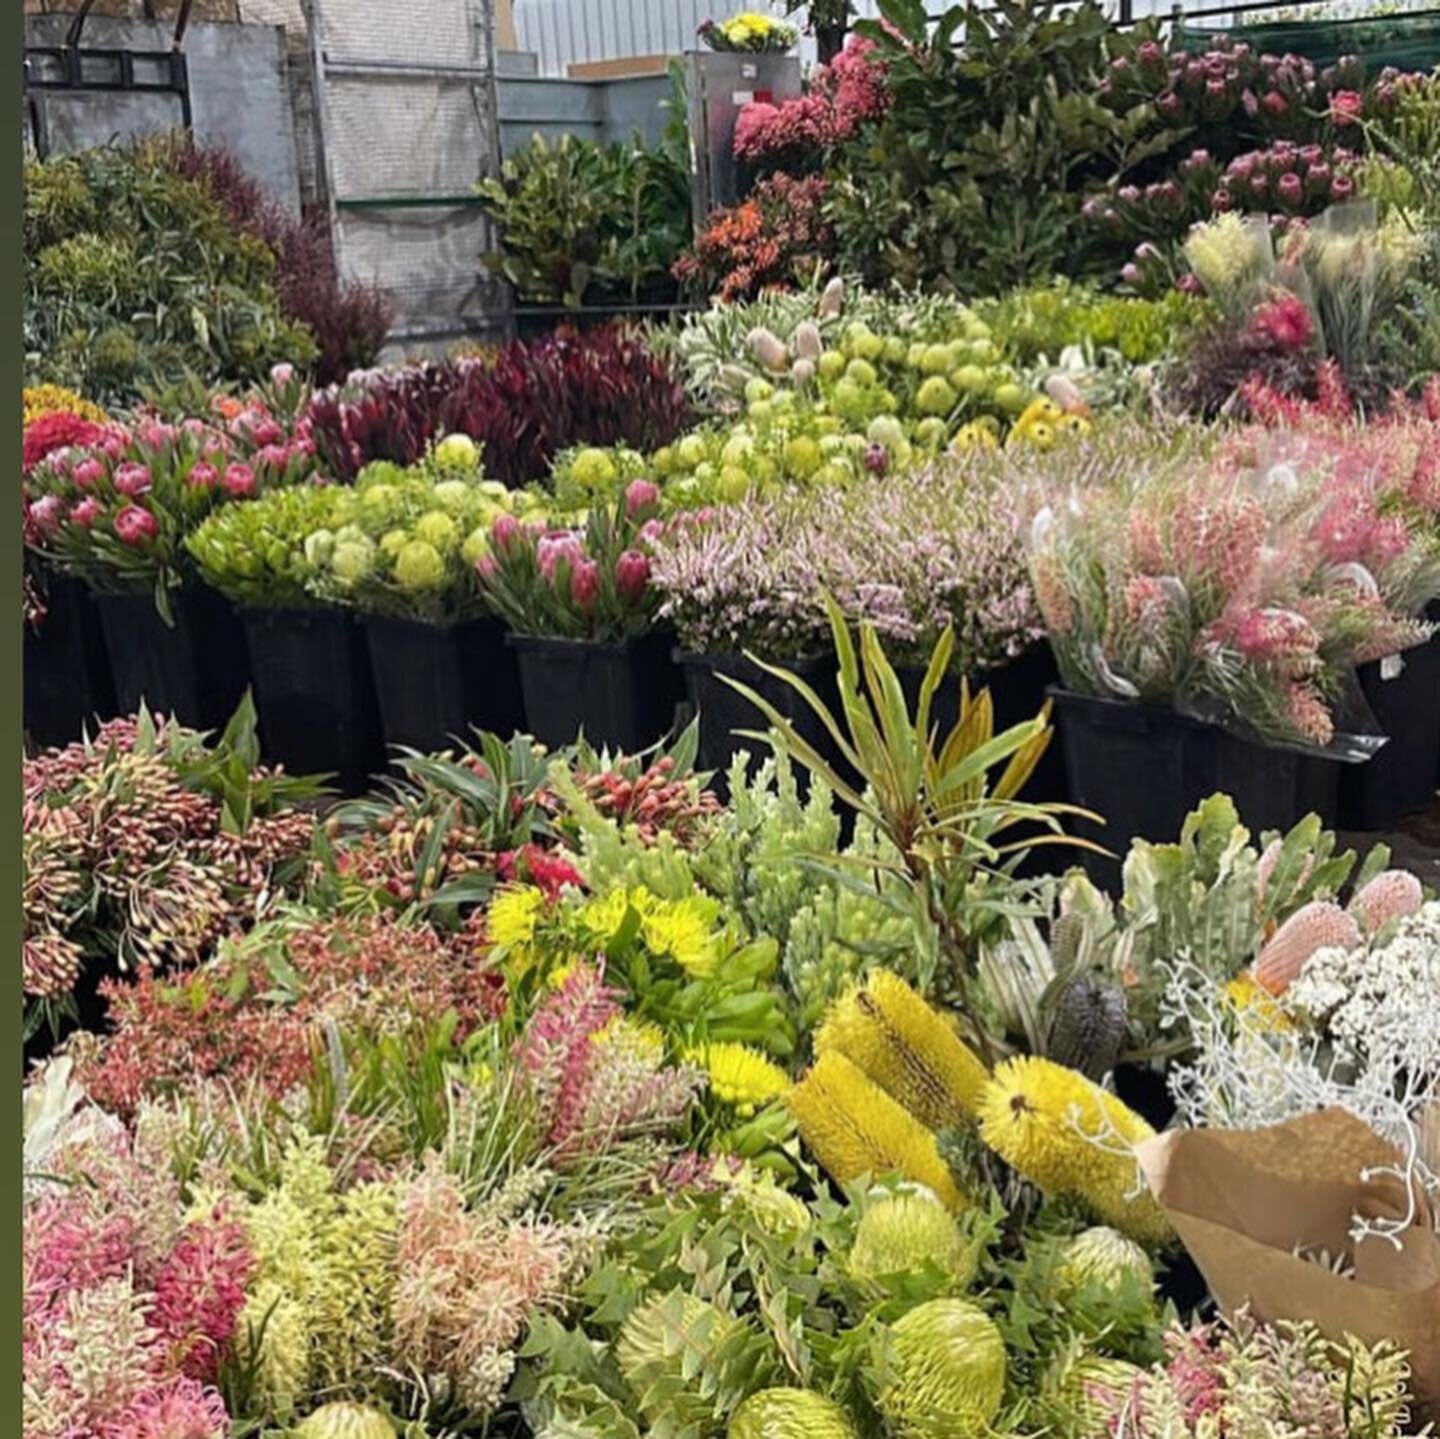 Today #atthemarket #eastcoastwildflowers @sydneyflowermarkets busy morning with some great help setting up the flower stand by @bess_paddington and @25jackgorham86  What a great display!